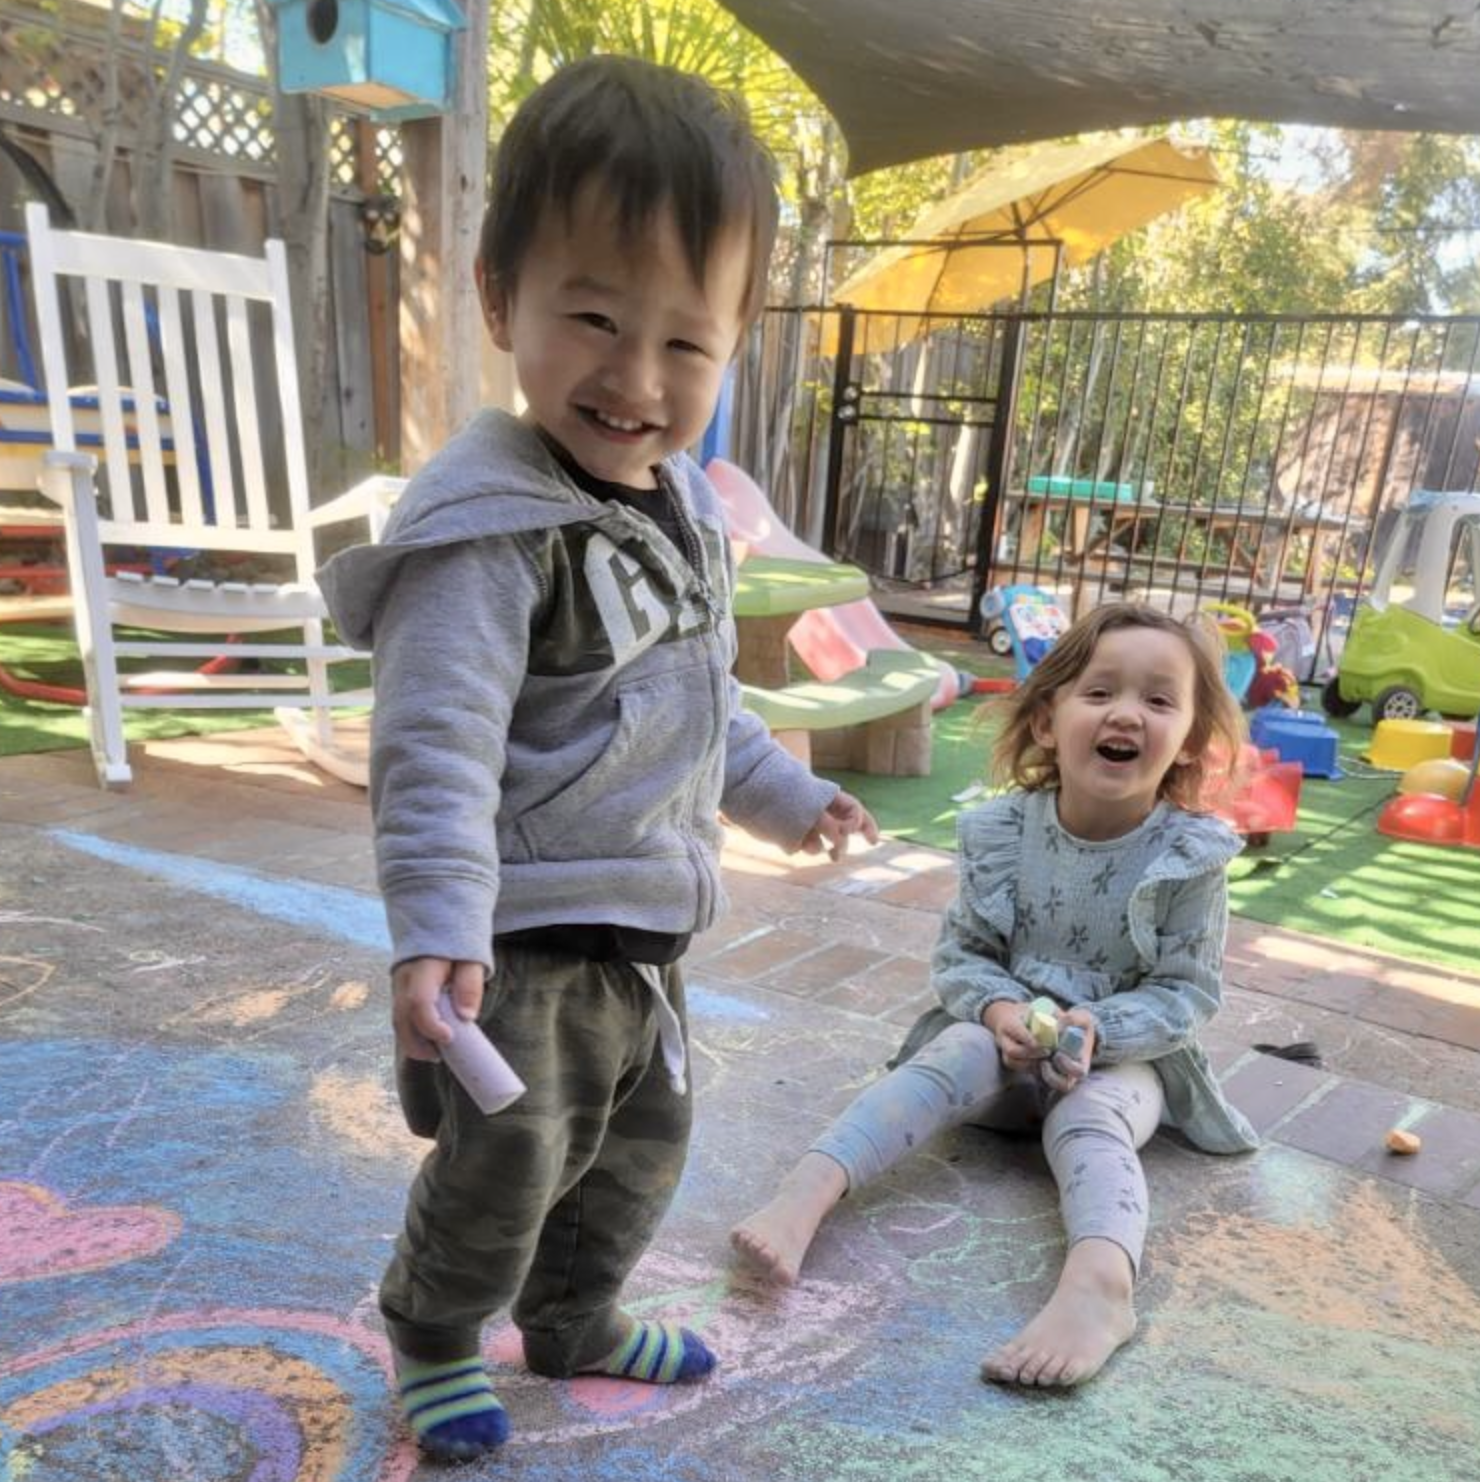 Some of our peek-a-boo daycare children playing with chalk